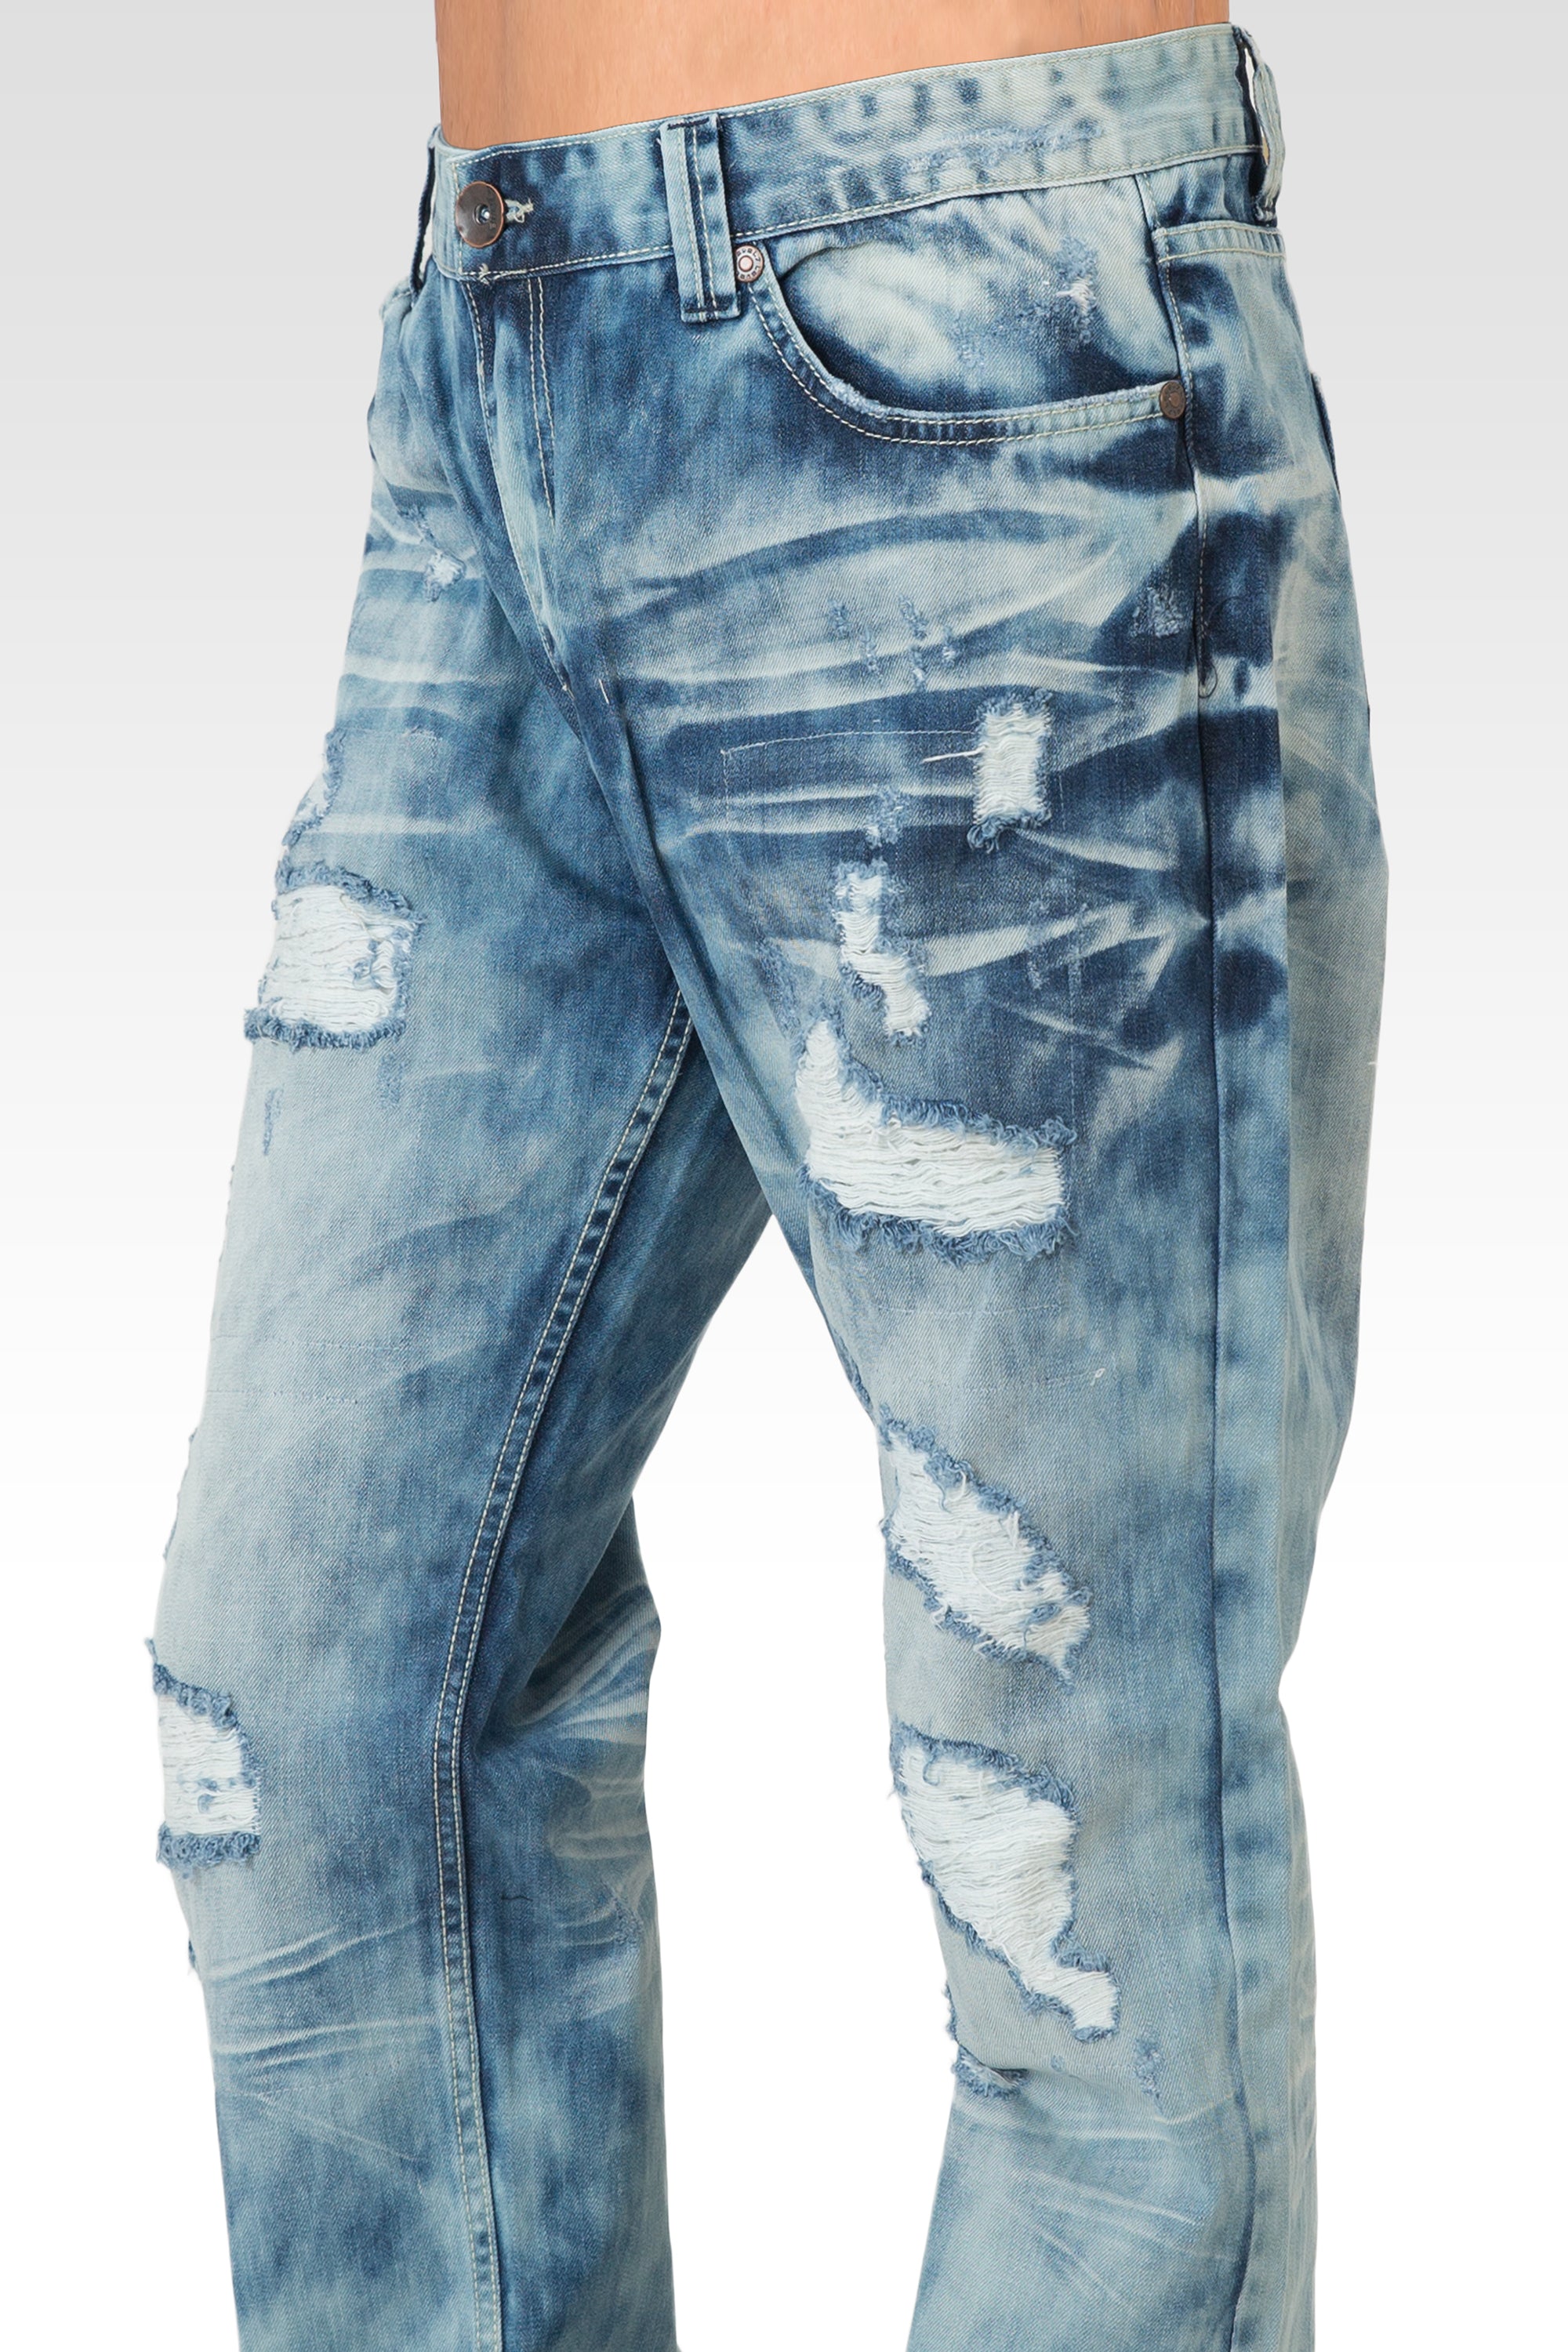 Destroyed Denim Jeans Ripped Skinny Jeans Men - China Women's Jeans and  Plus Size Women's Jeans price | Made-in-China.com